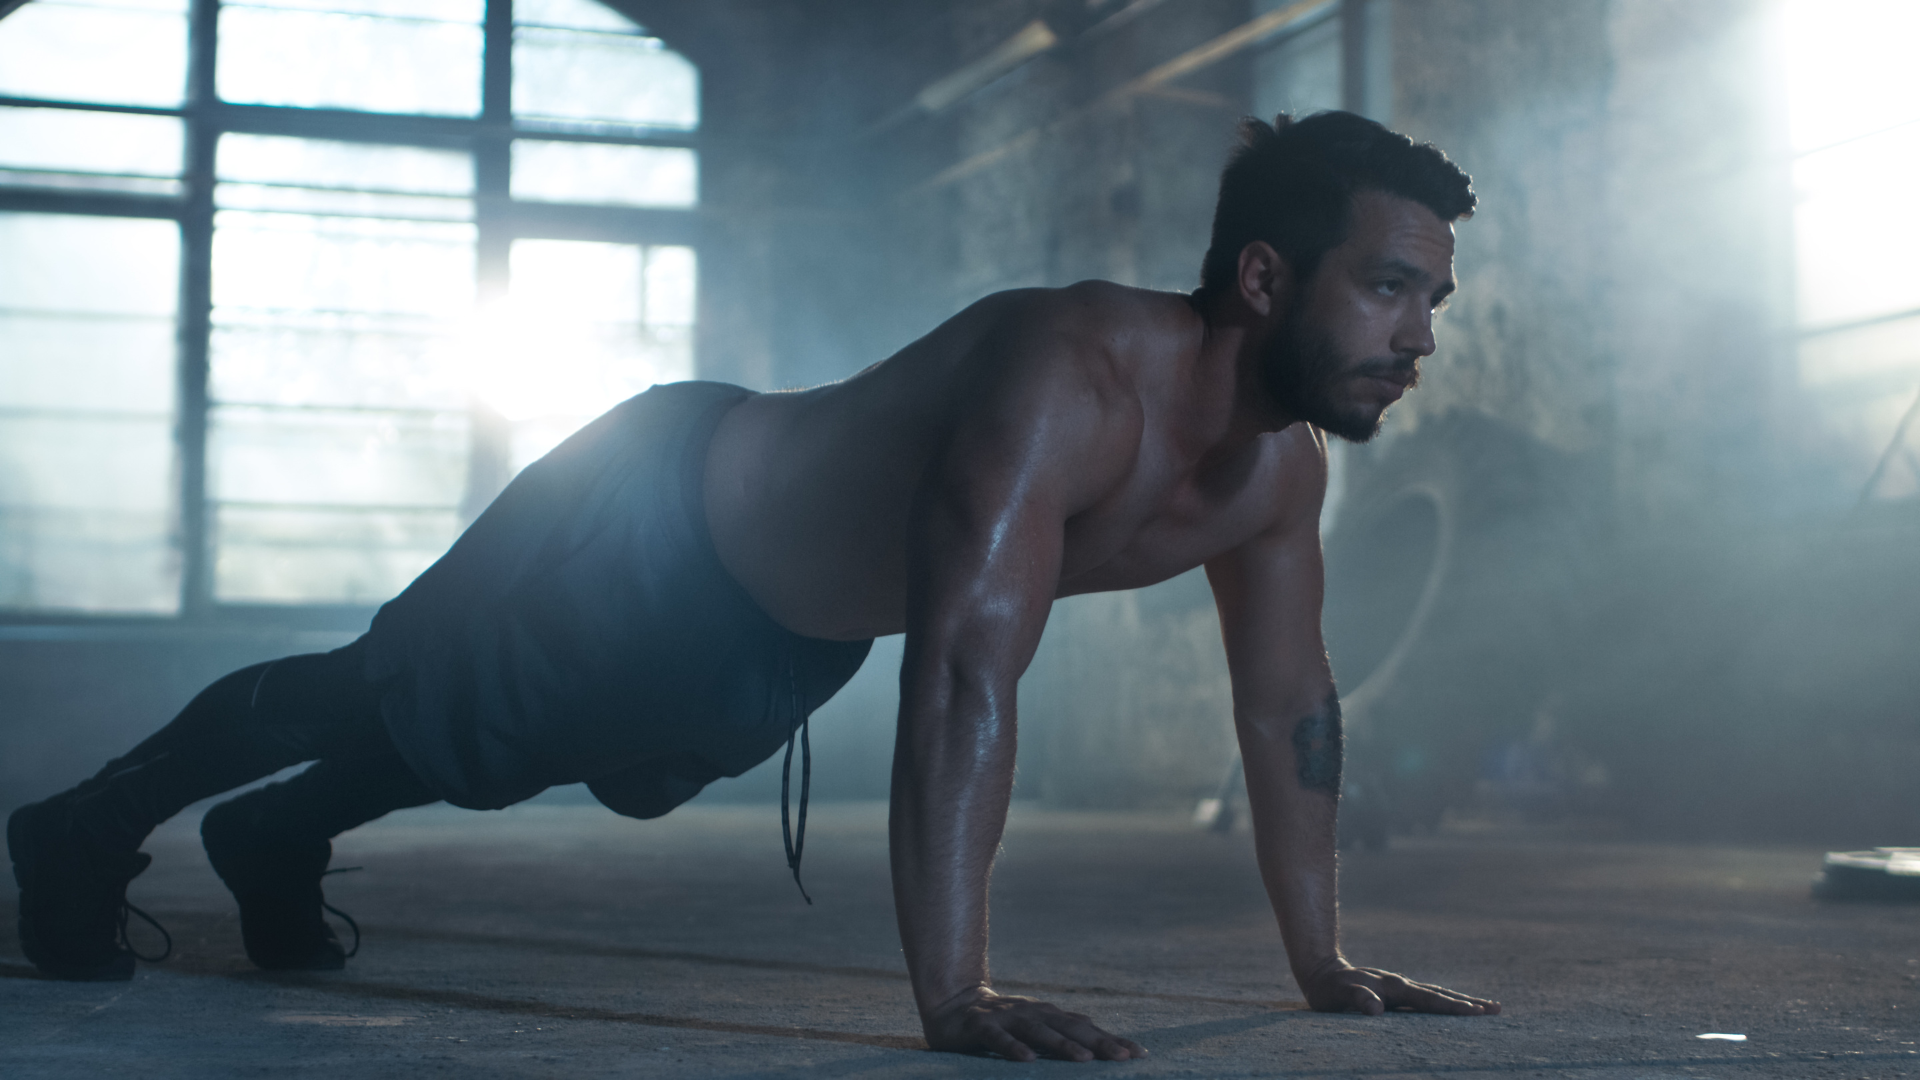 A man performing pushups intensely.